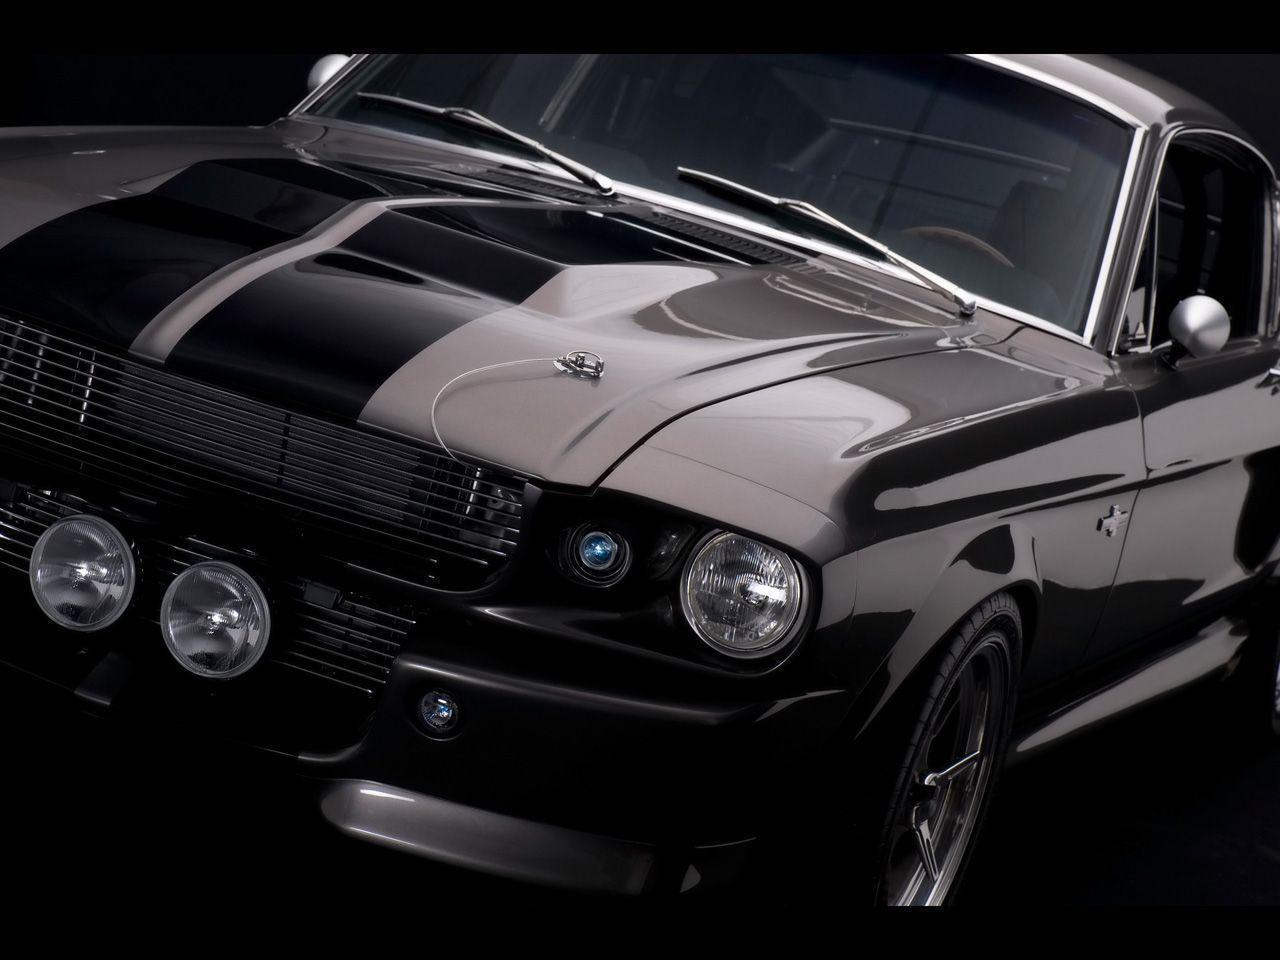 Nothing found for Eleanor Mustang 1967 Wallpaper Download The Free